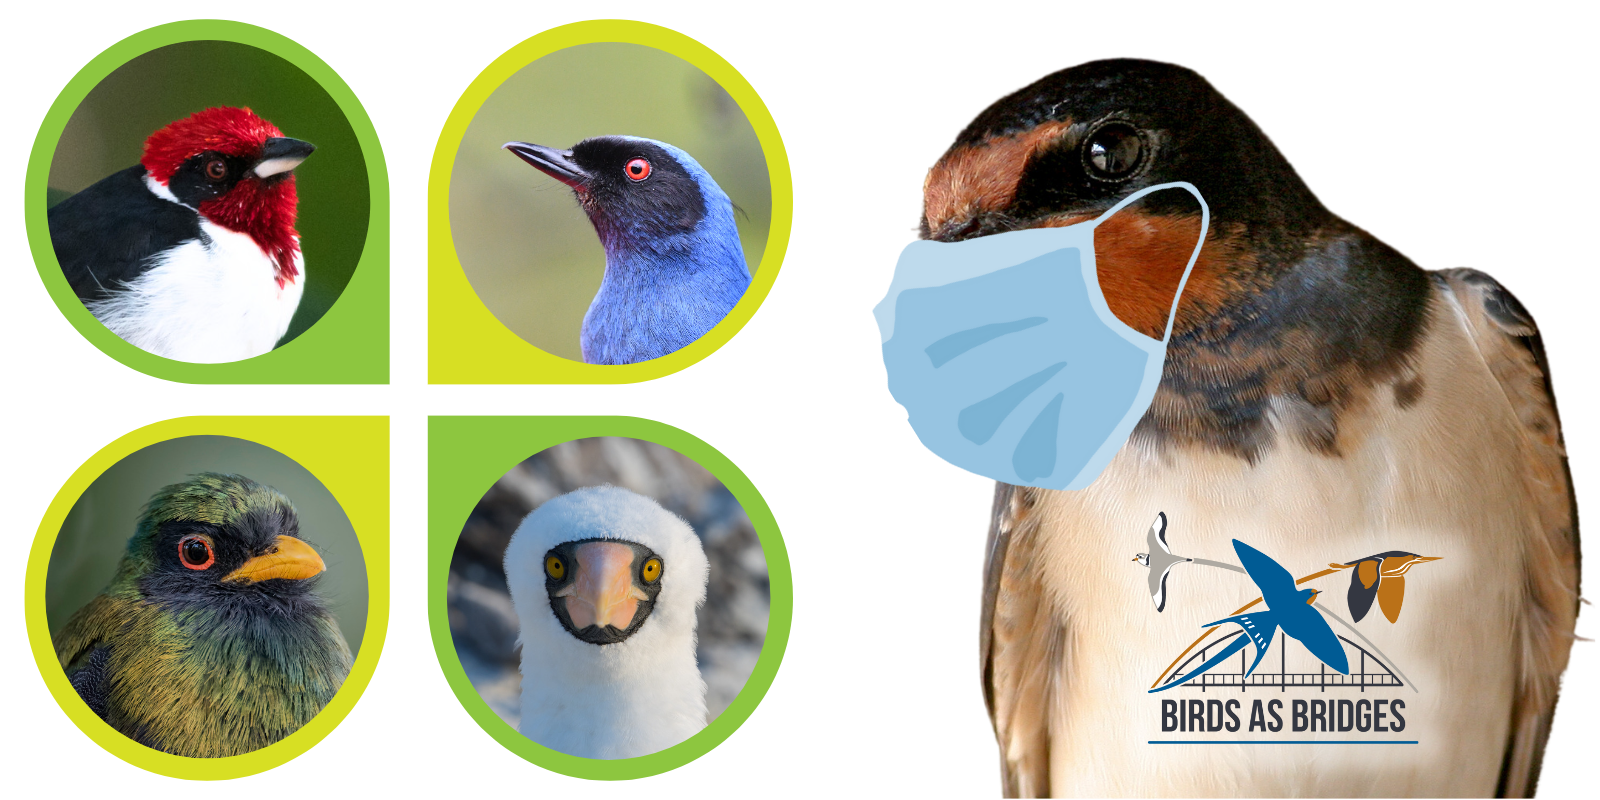 Clockwise from top left: Masked Cardinal, Masked Flowerpiercer, Masked Booby, Masked Trogon. On right: masked Barn Swallow.